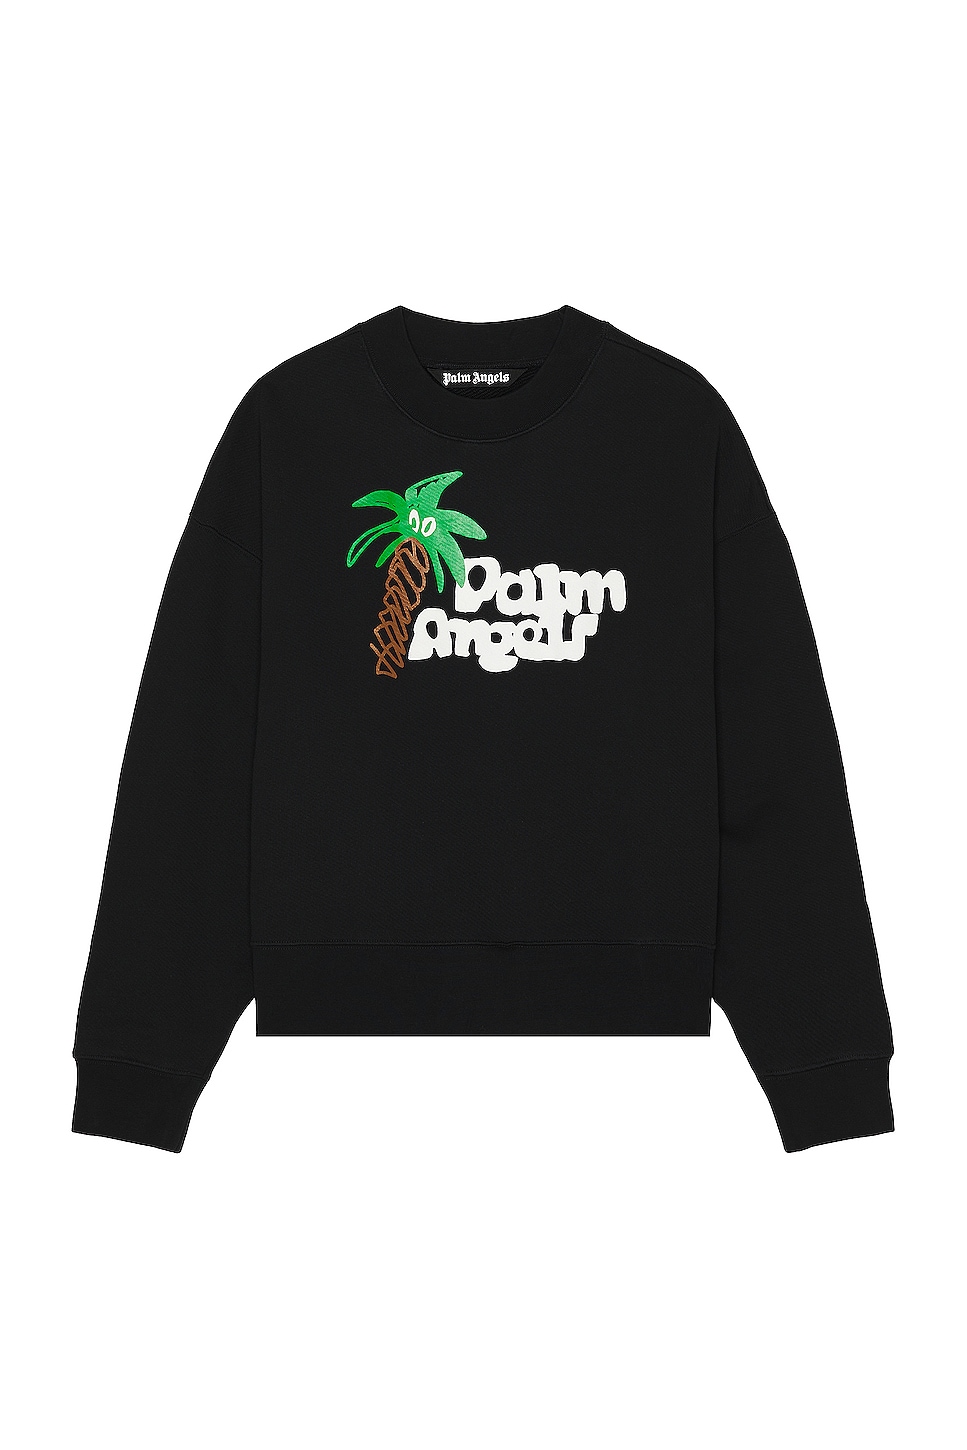 Image 1 of Palm Angels Sketchy Classic Sweater in Black & White